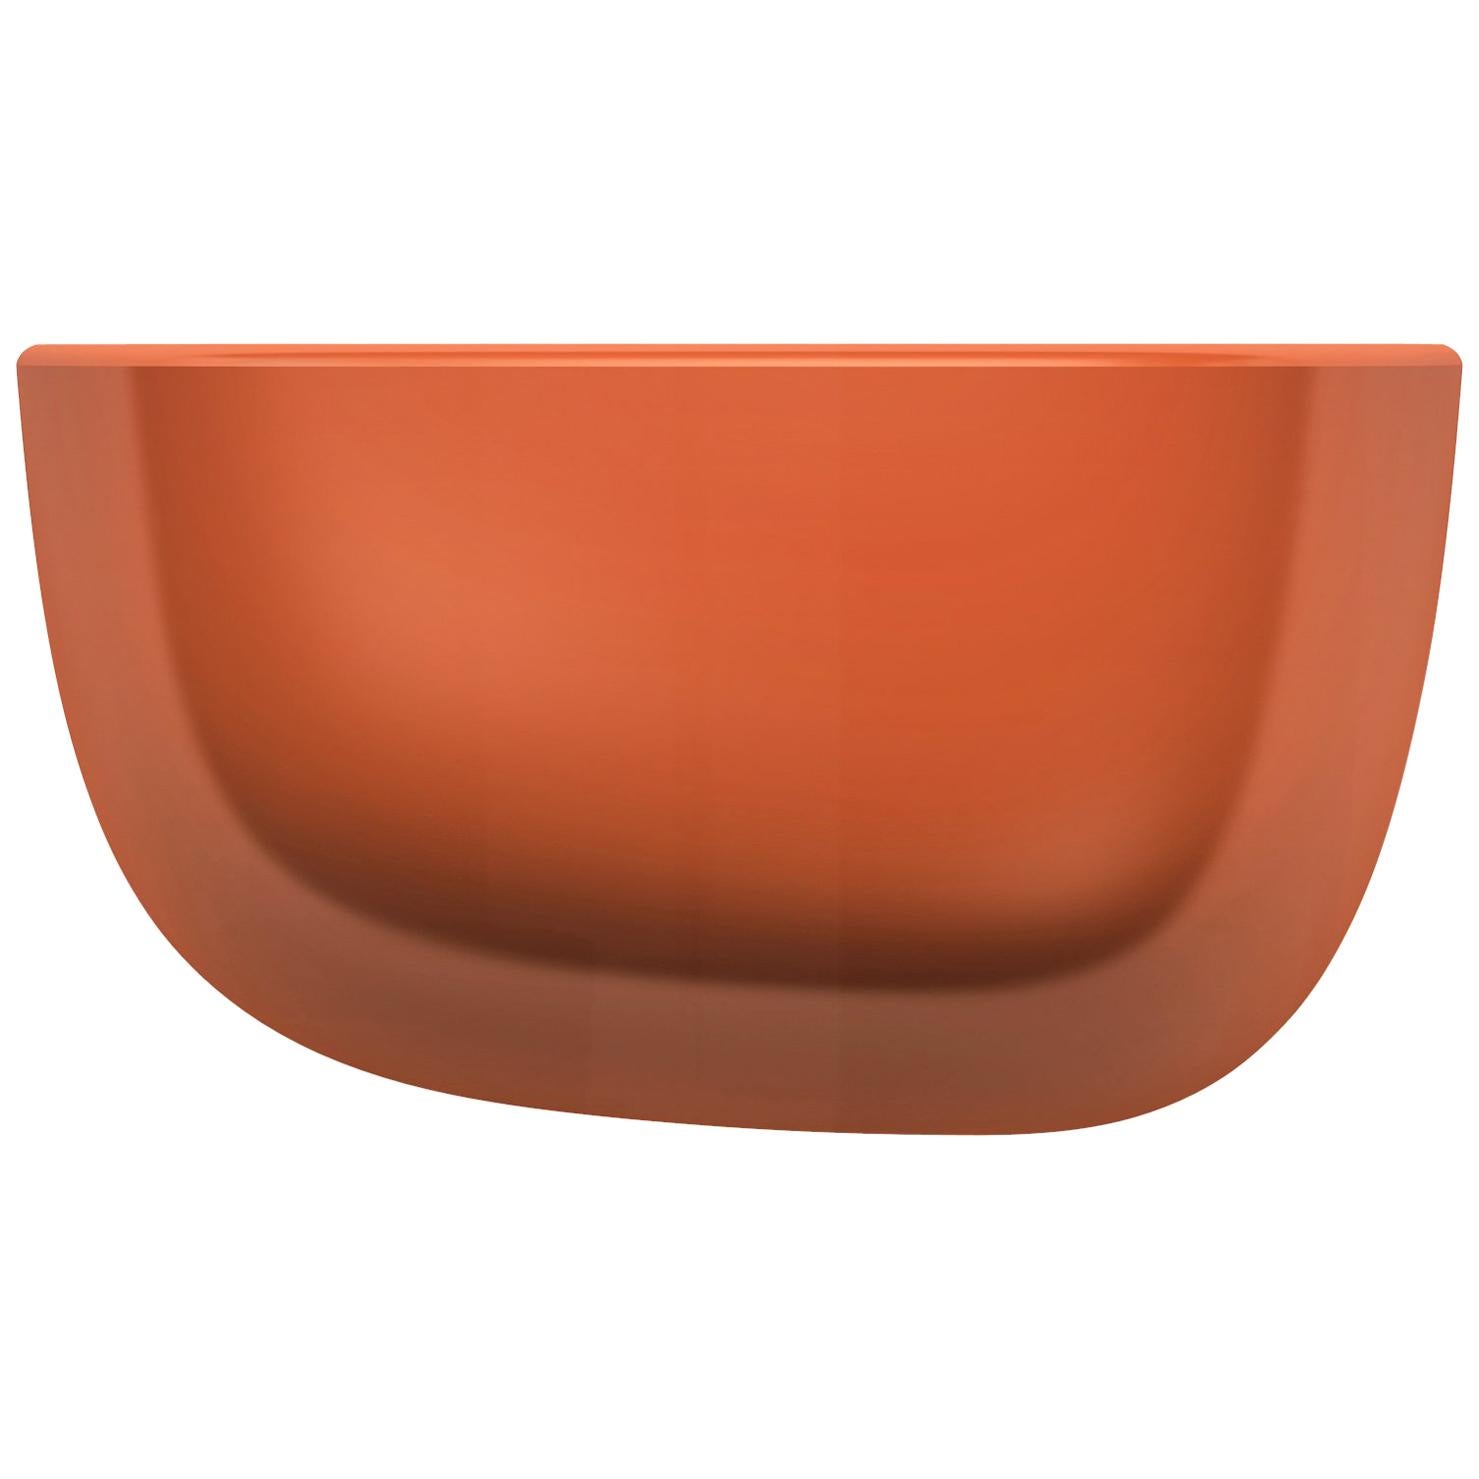 Vitra Small Corniches in Orange by Ronan & Erwan Bouroullec For Sale